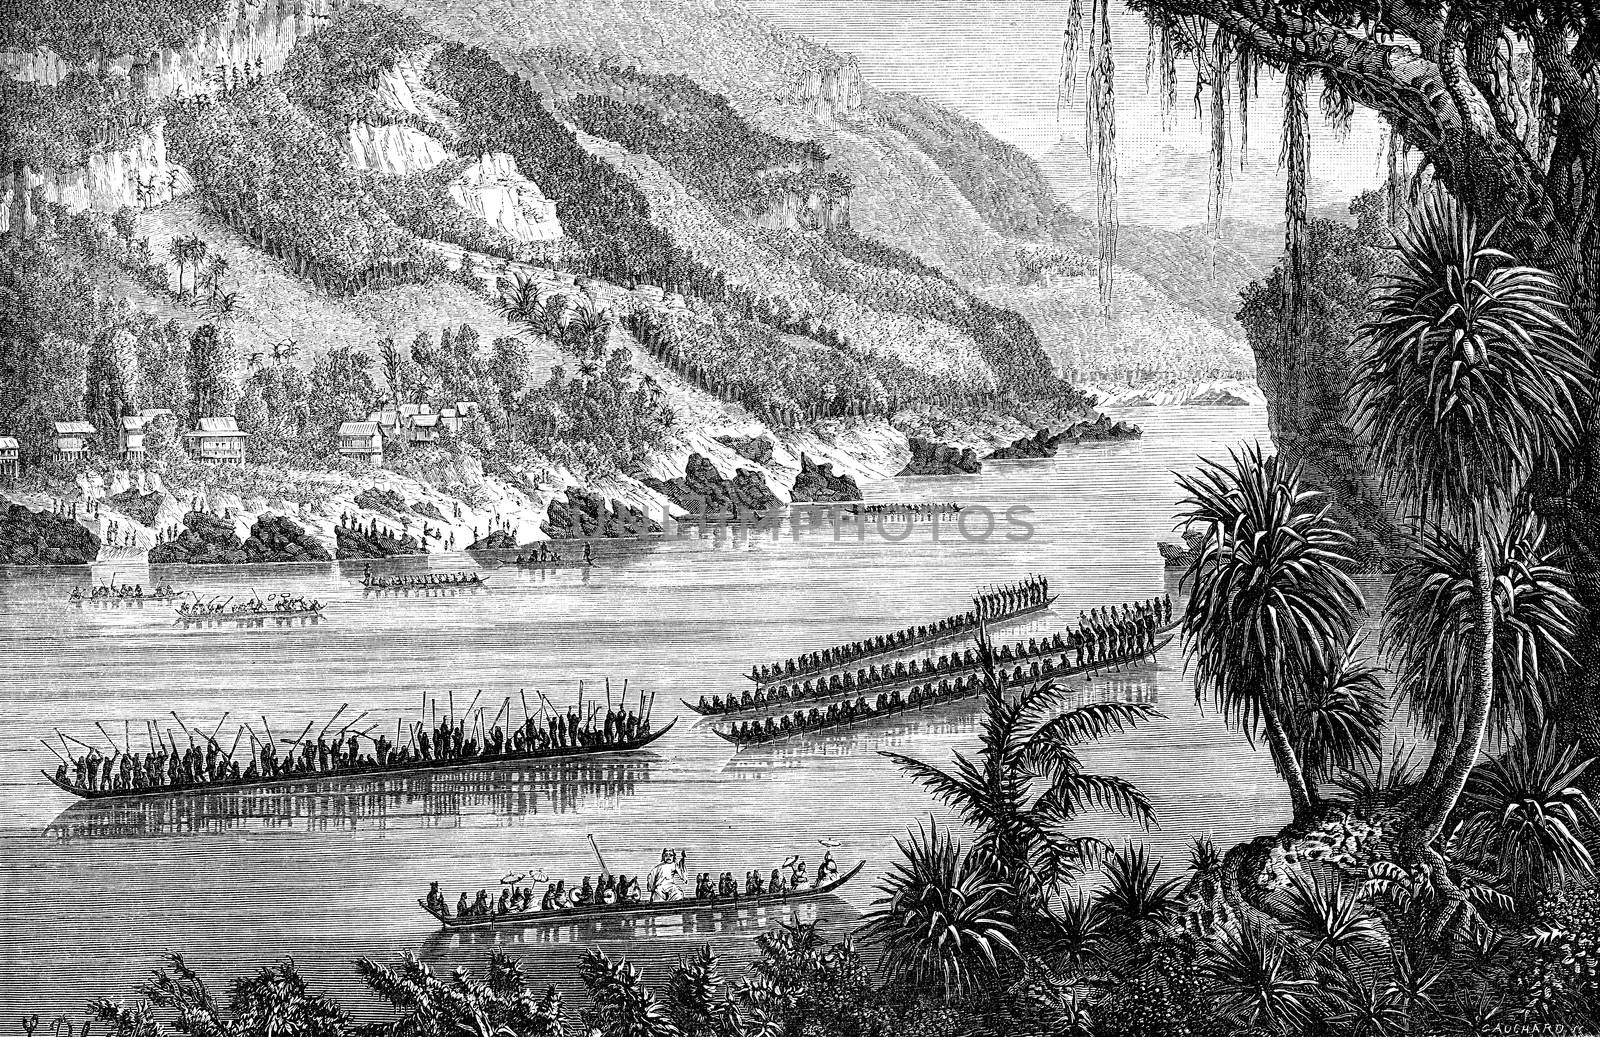 Boat race on the Mekong, vintage engraving. by Morphart